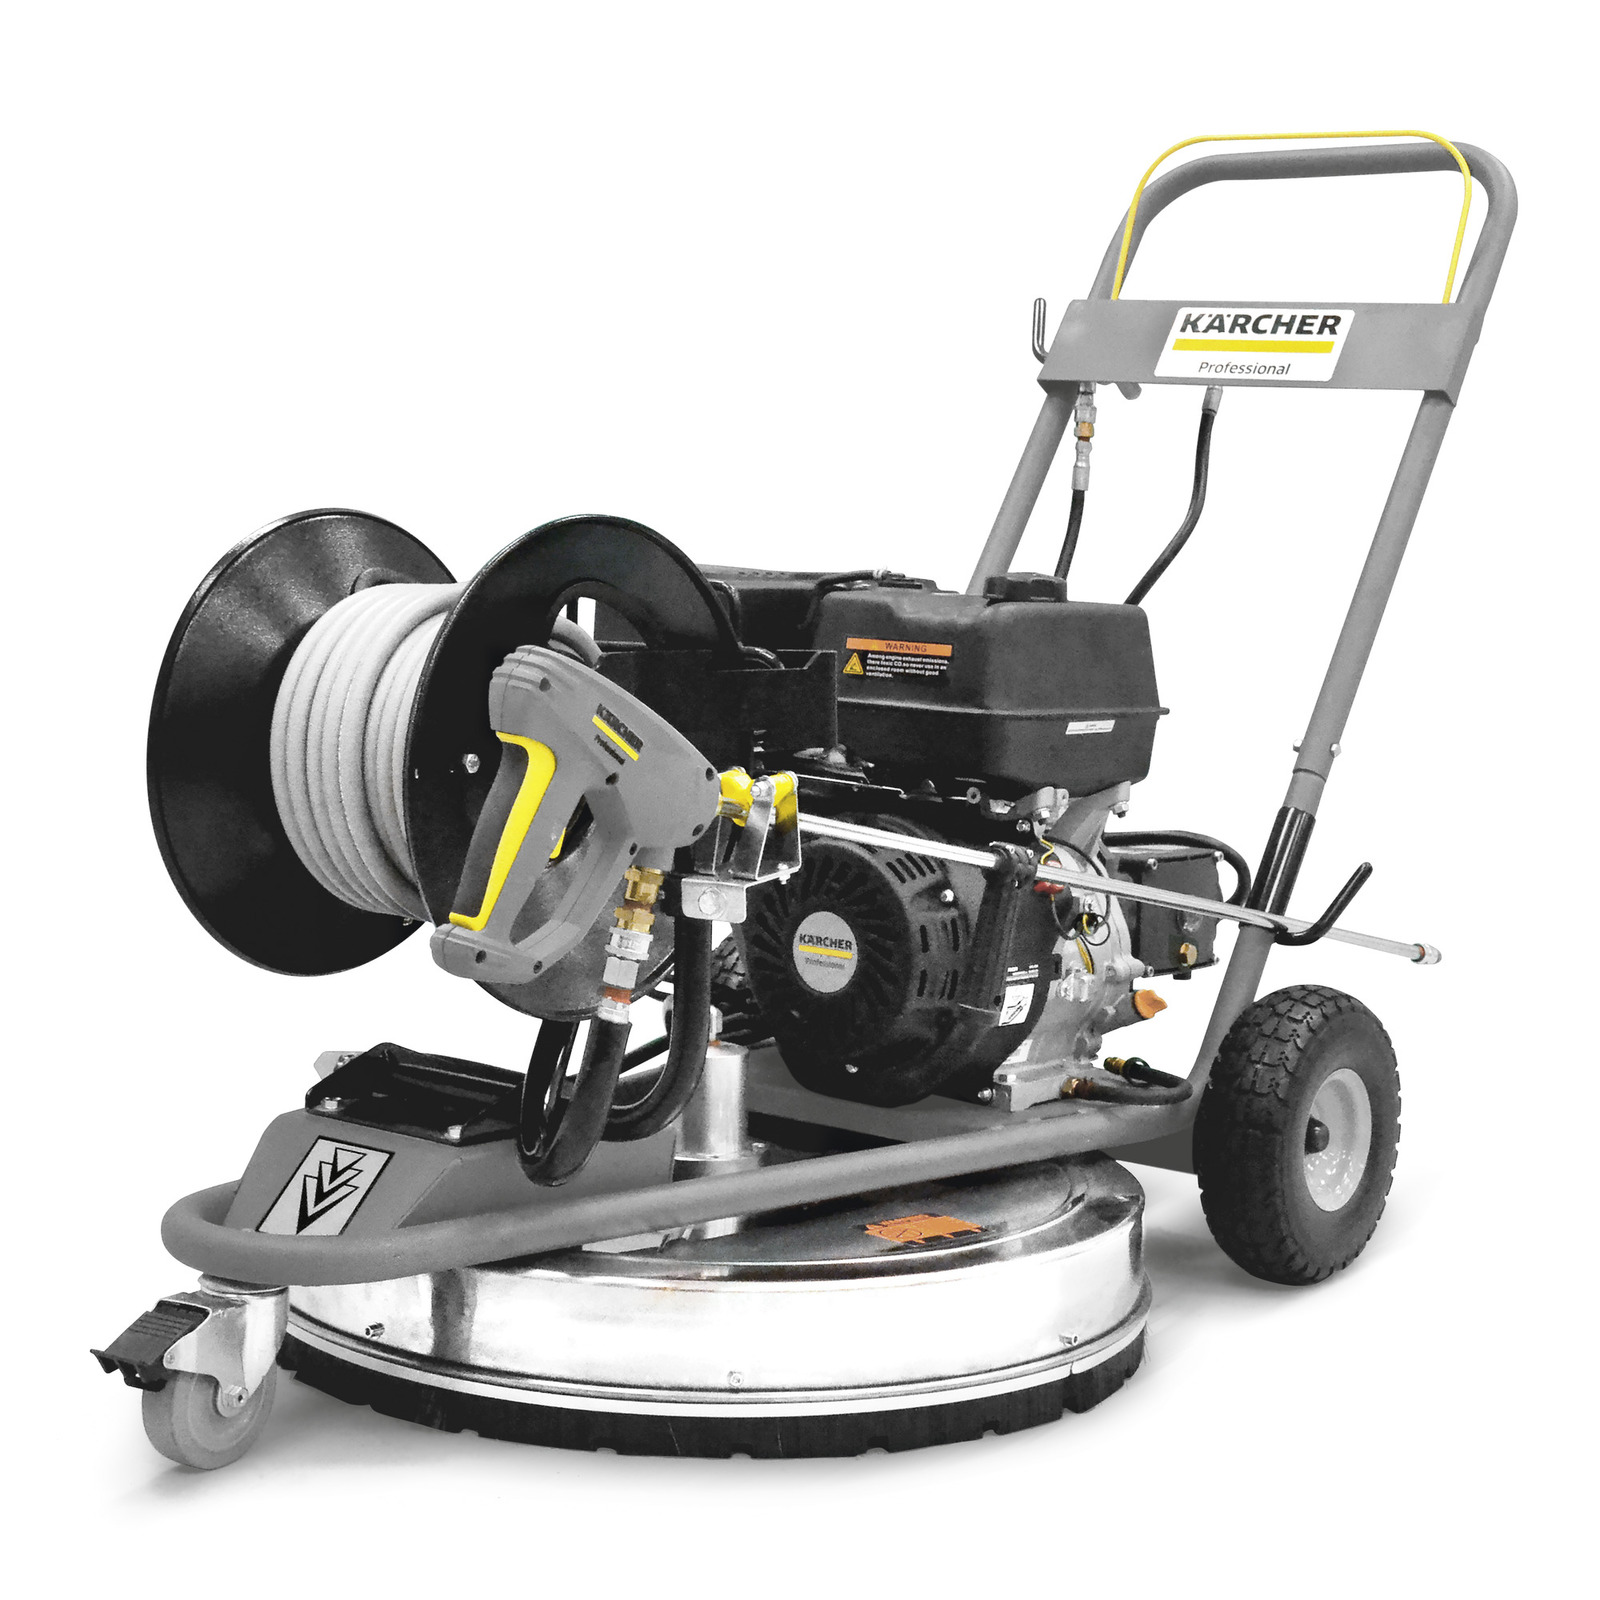 Karcher Jarvis Surface Cleaner/Pressure Washer SCW 4.0/40 G karcher, jarvis, surface, cleaner, pressure, washer, scw 2.4/25 G, cold-water, cold, cleaning, professional, commercial, gas, powered, gasoline, 